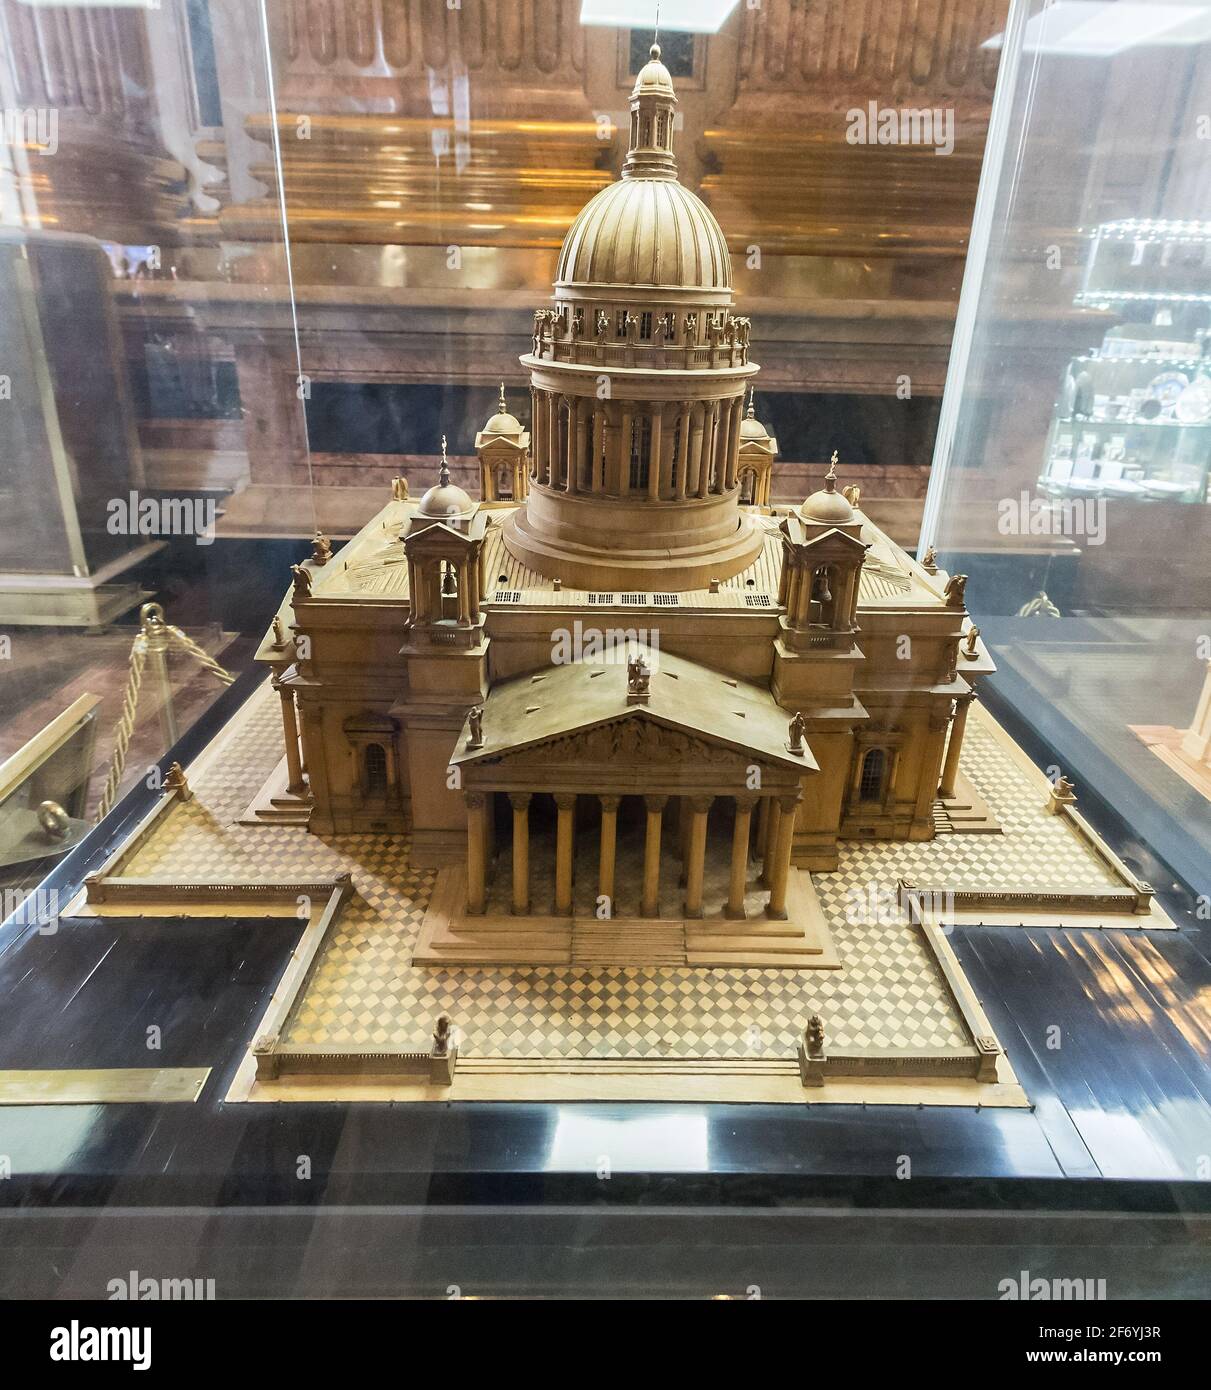 ST. PETERSBURG, RUSSIA - MAY 30, 2017: Model of St. Isaac's Cathedral, author M. Salin, carving from linden wood, 1848, Exhibited in St. Isaac's Cathe Stock Photo